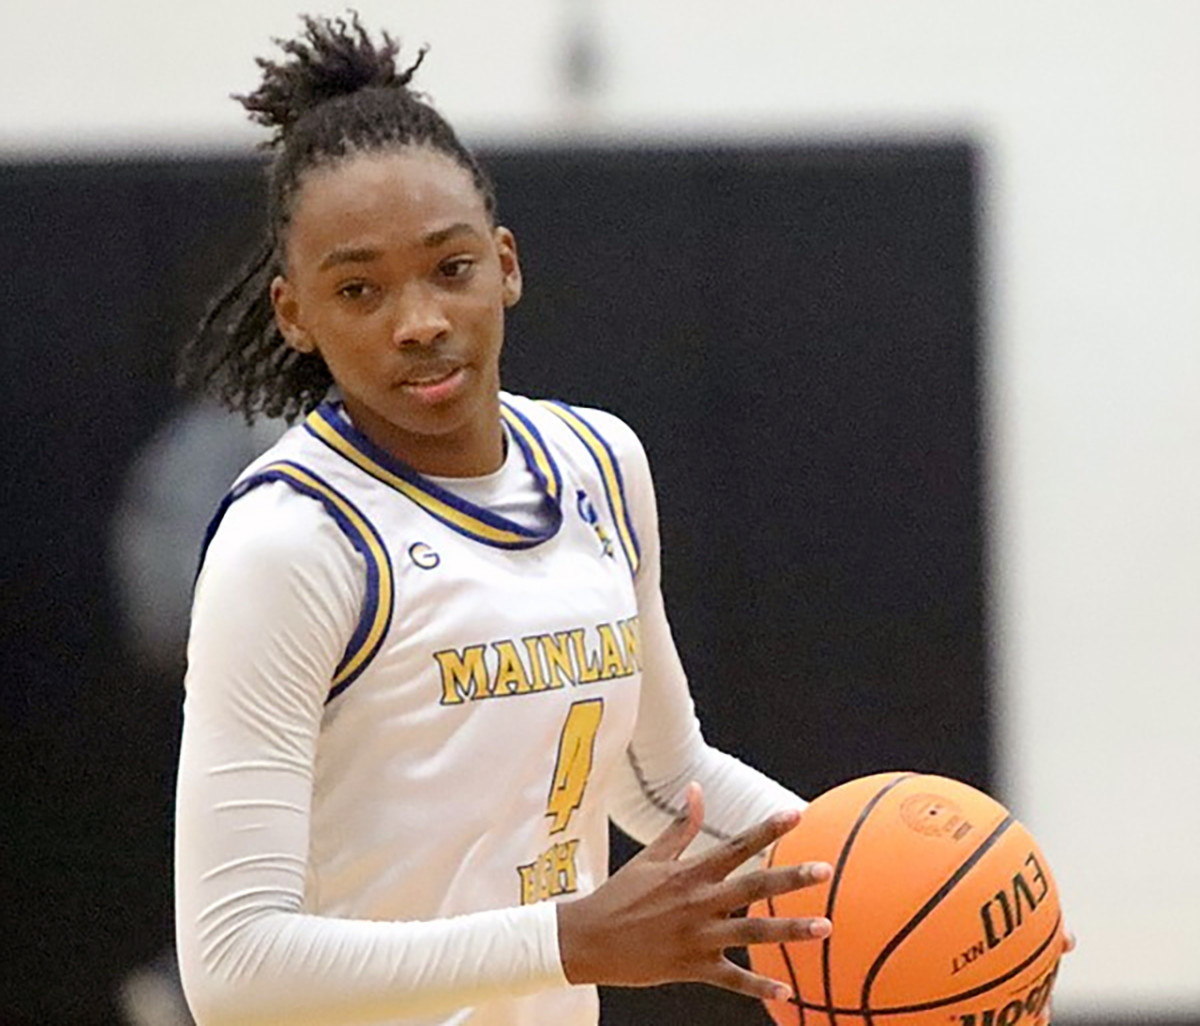 Mainland's Anovia Sheals had 21 points and 9 rebounds to pace the Buccaneers to 62-31 win over River Ridge in one of the FHSAA Class 5A Girls Basketball State Semifinals on Wednesday.